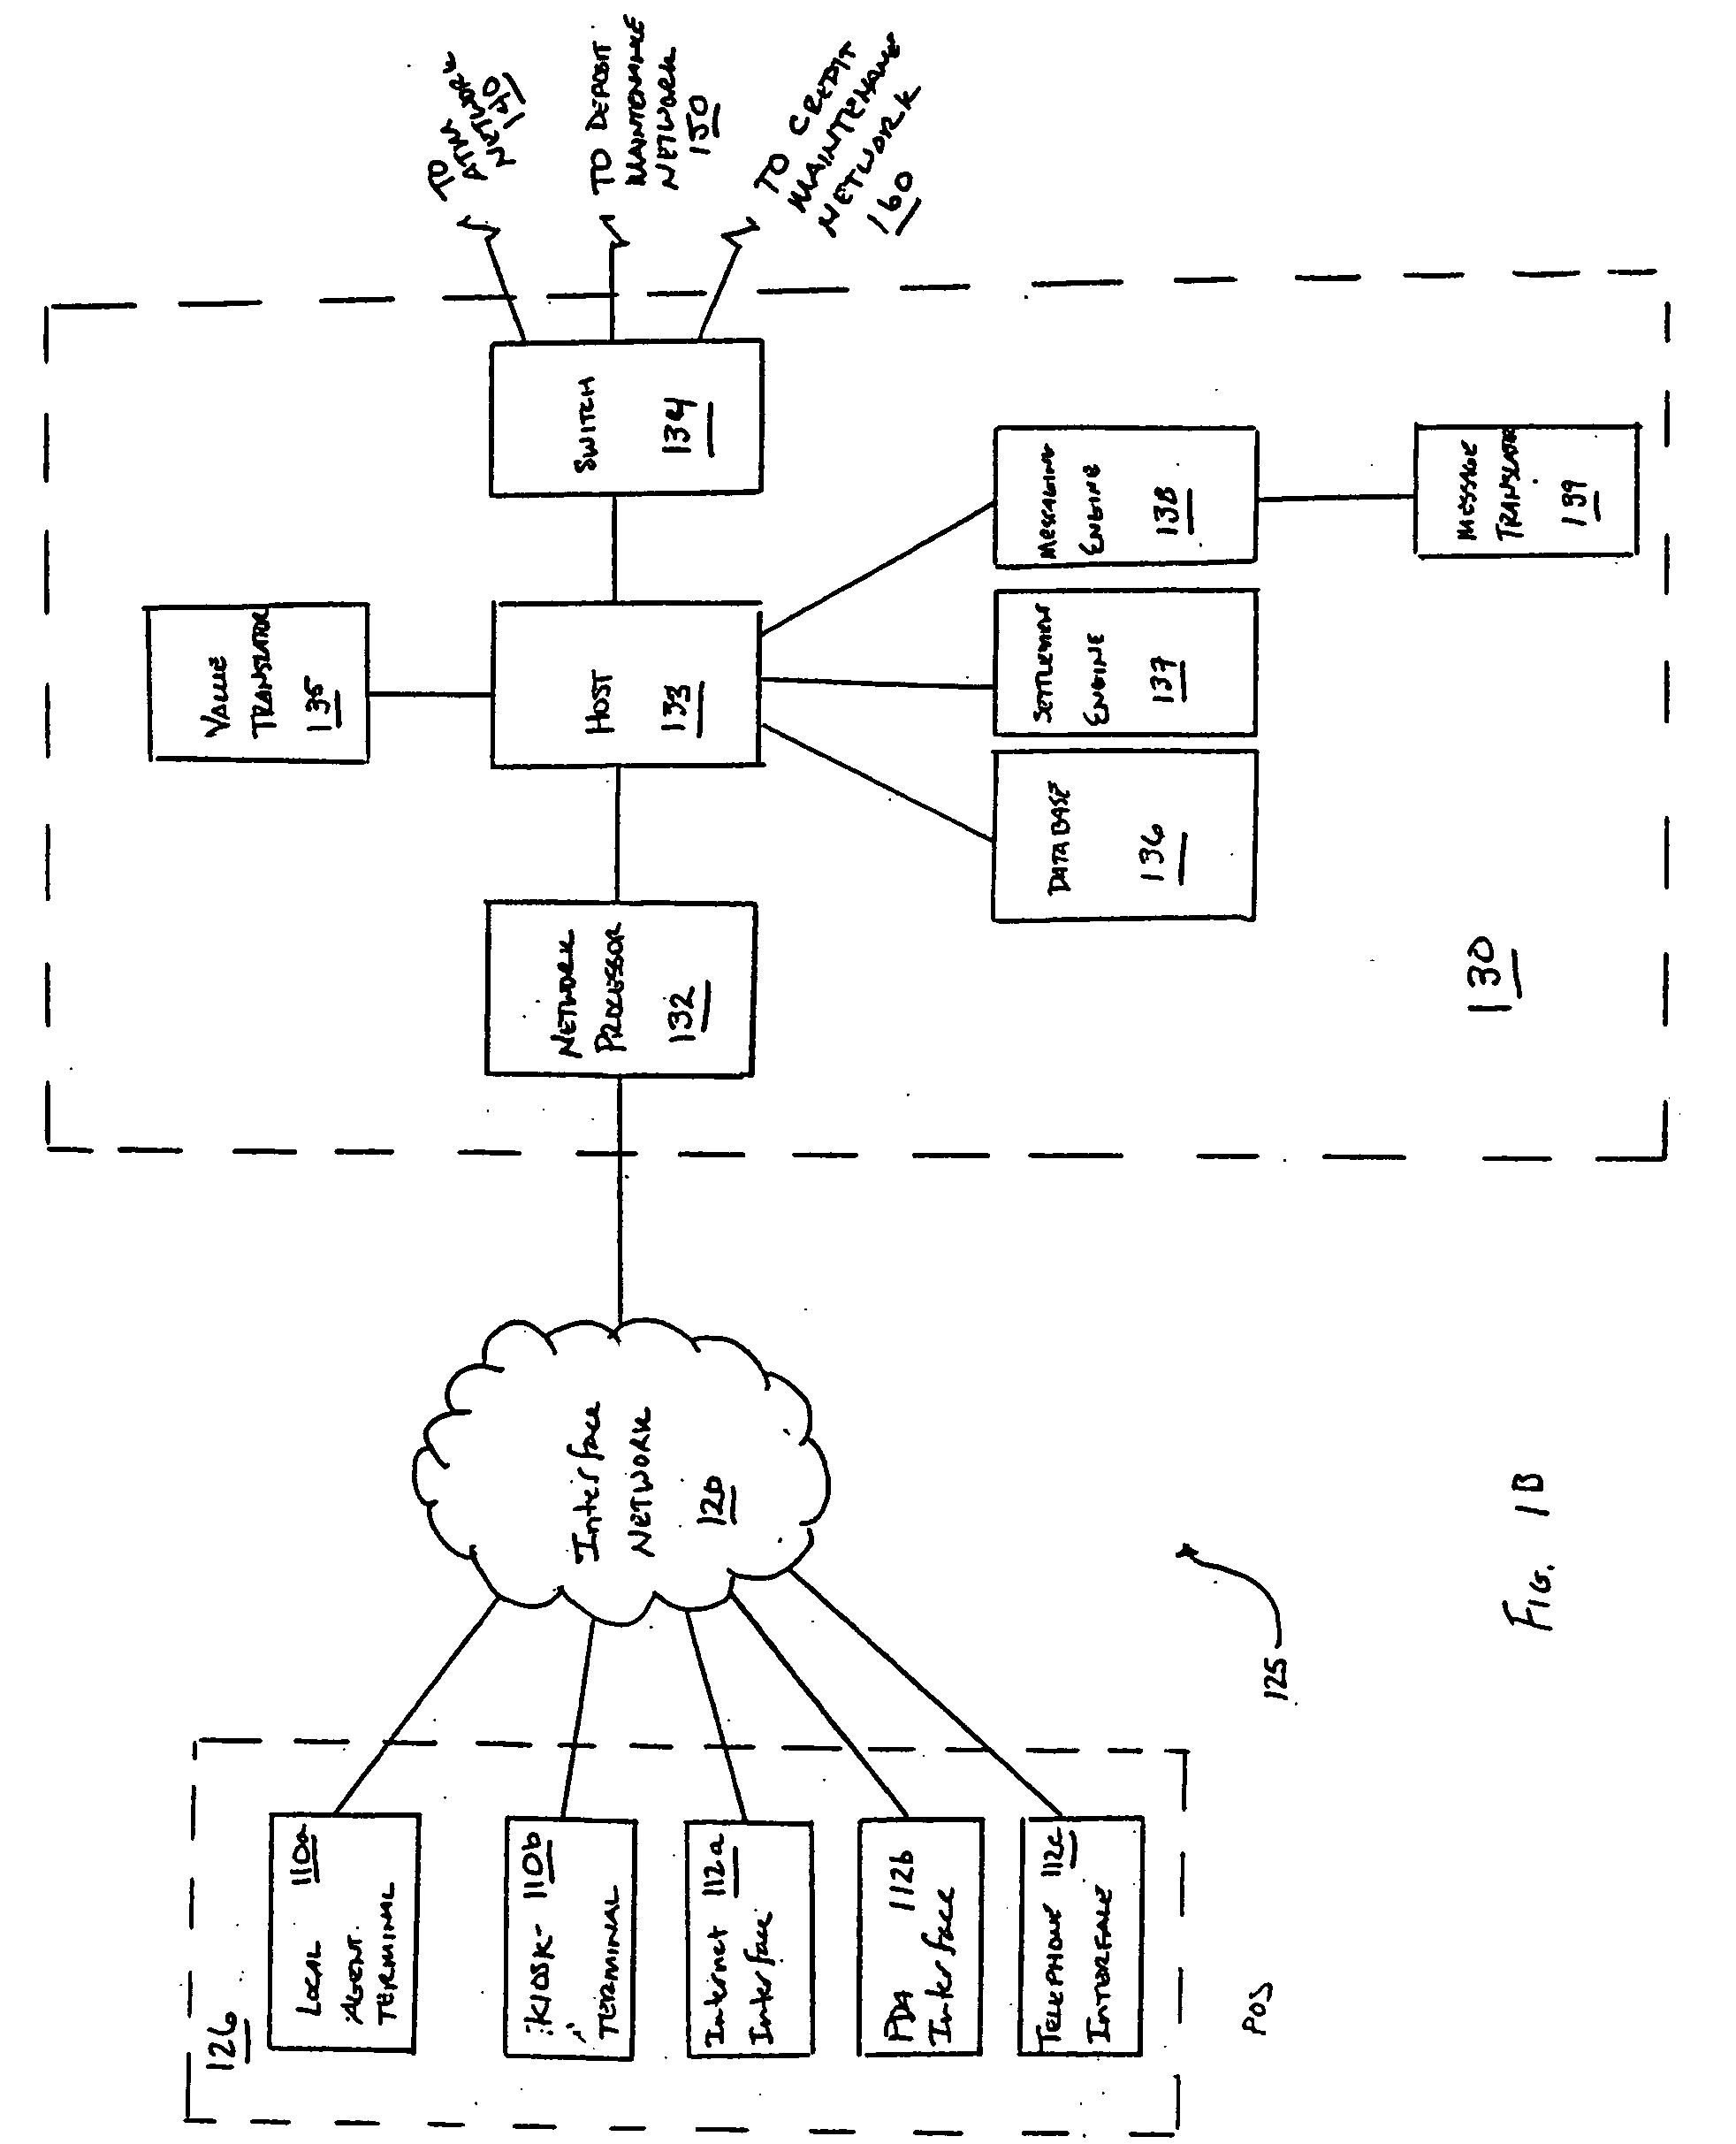 System and method for transferring money from one country to a stored value account in a different country